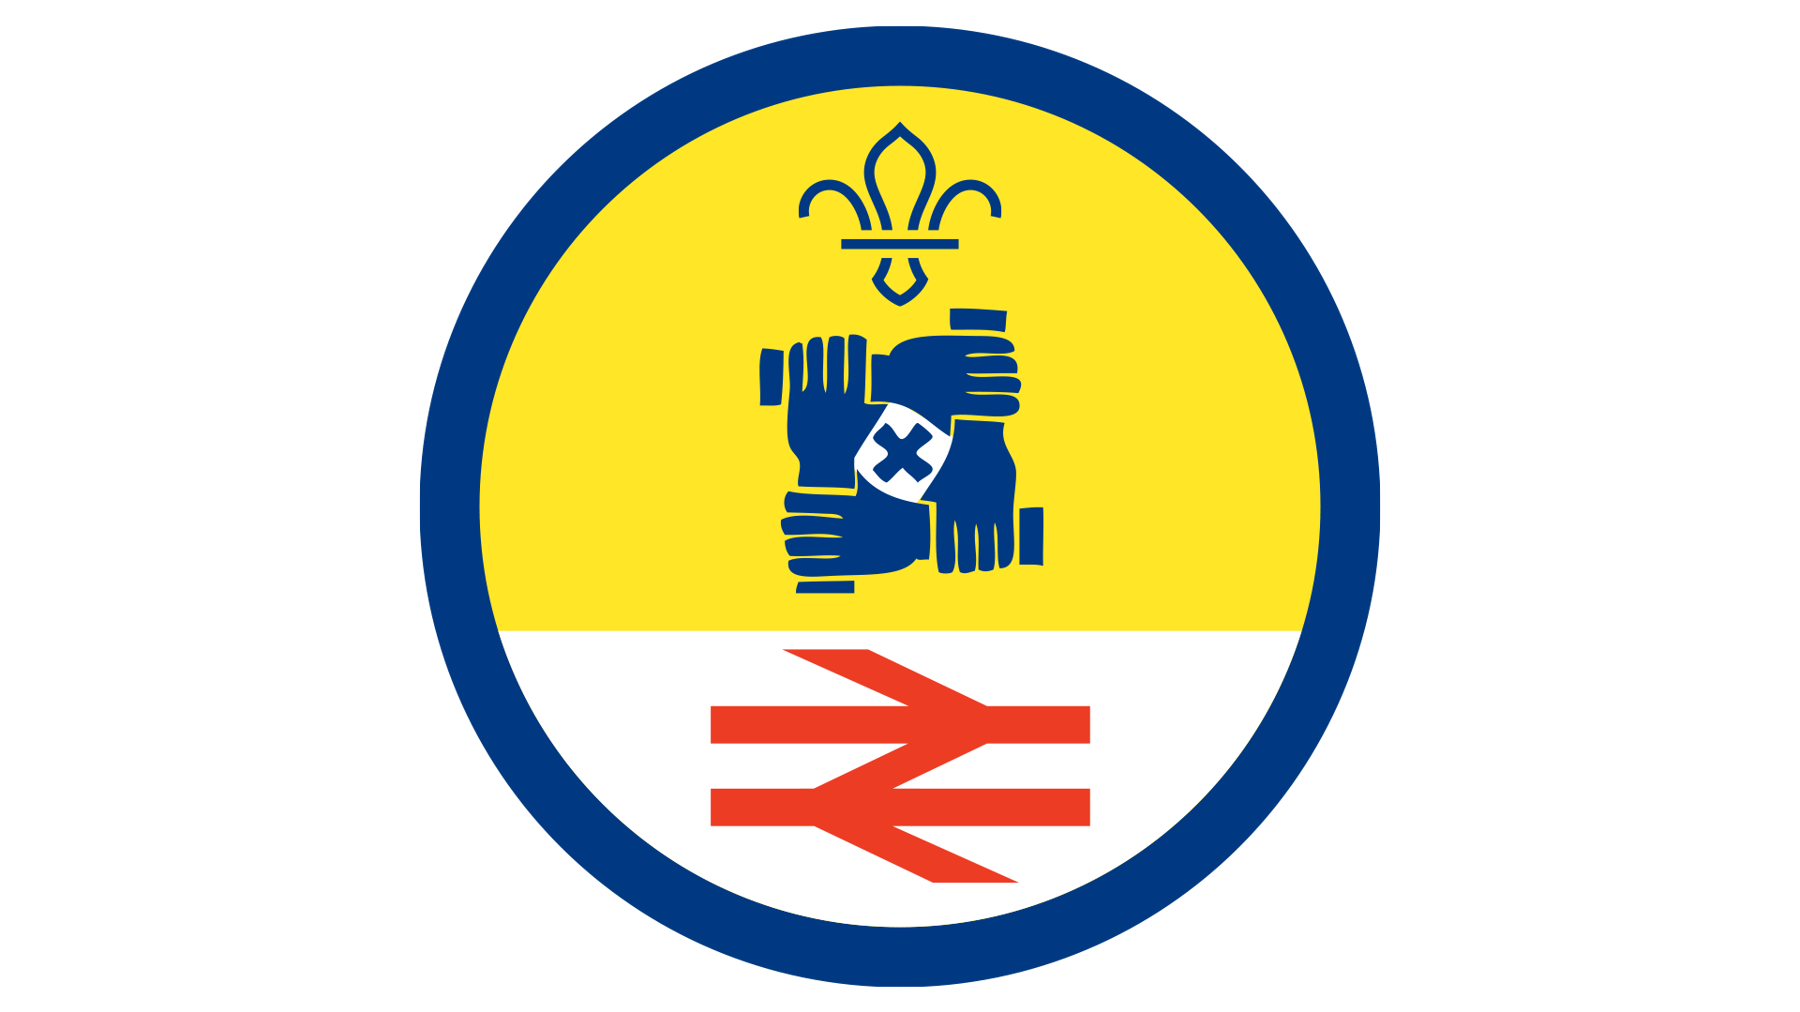 Activity Badge sponsored by the rail industry